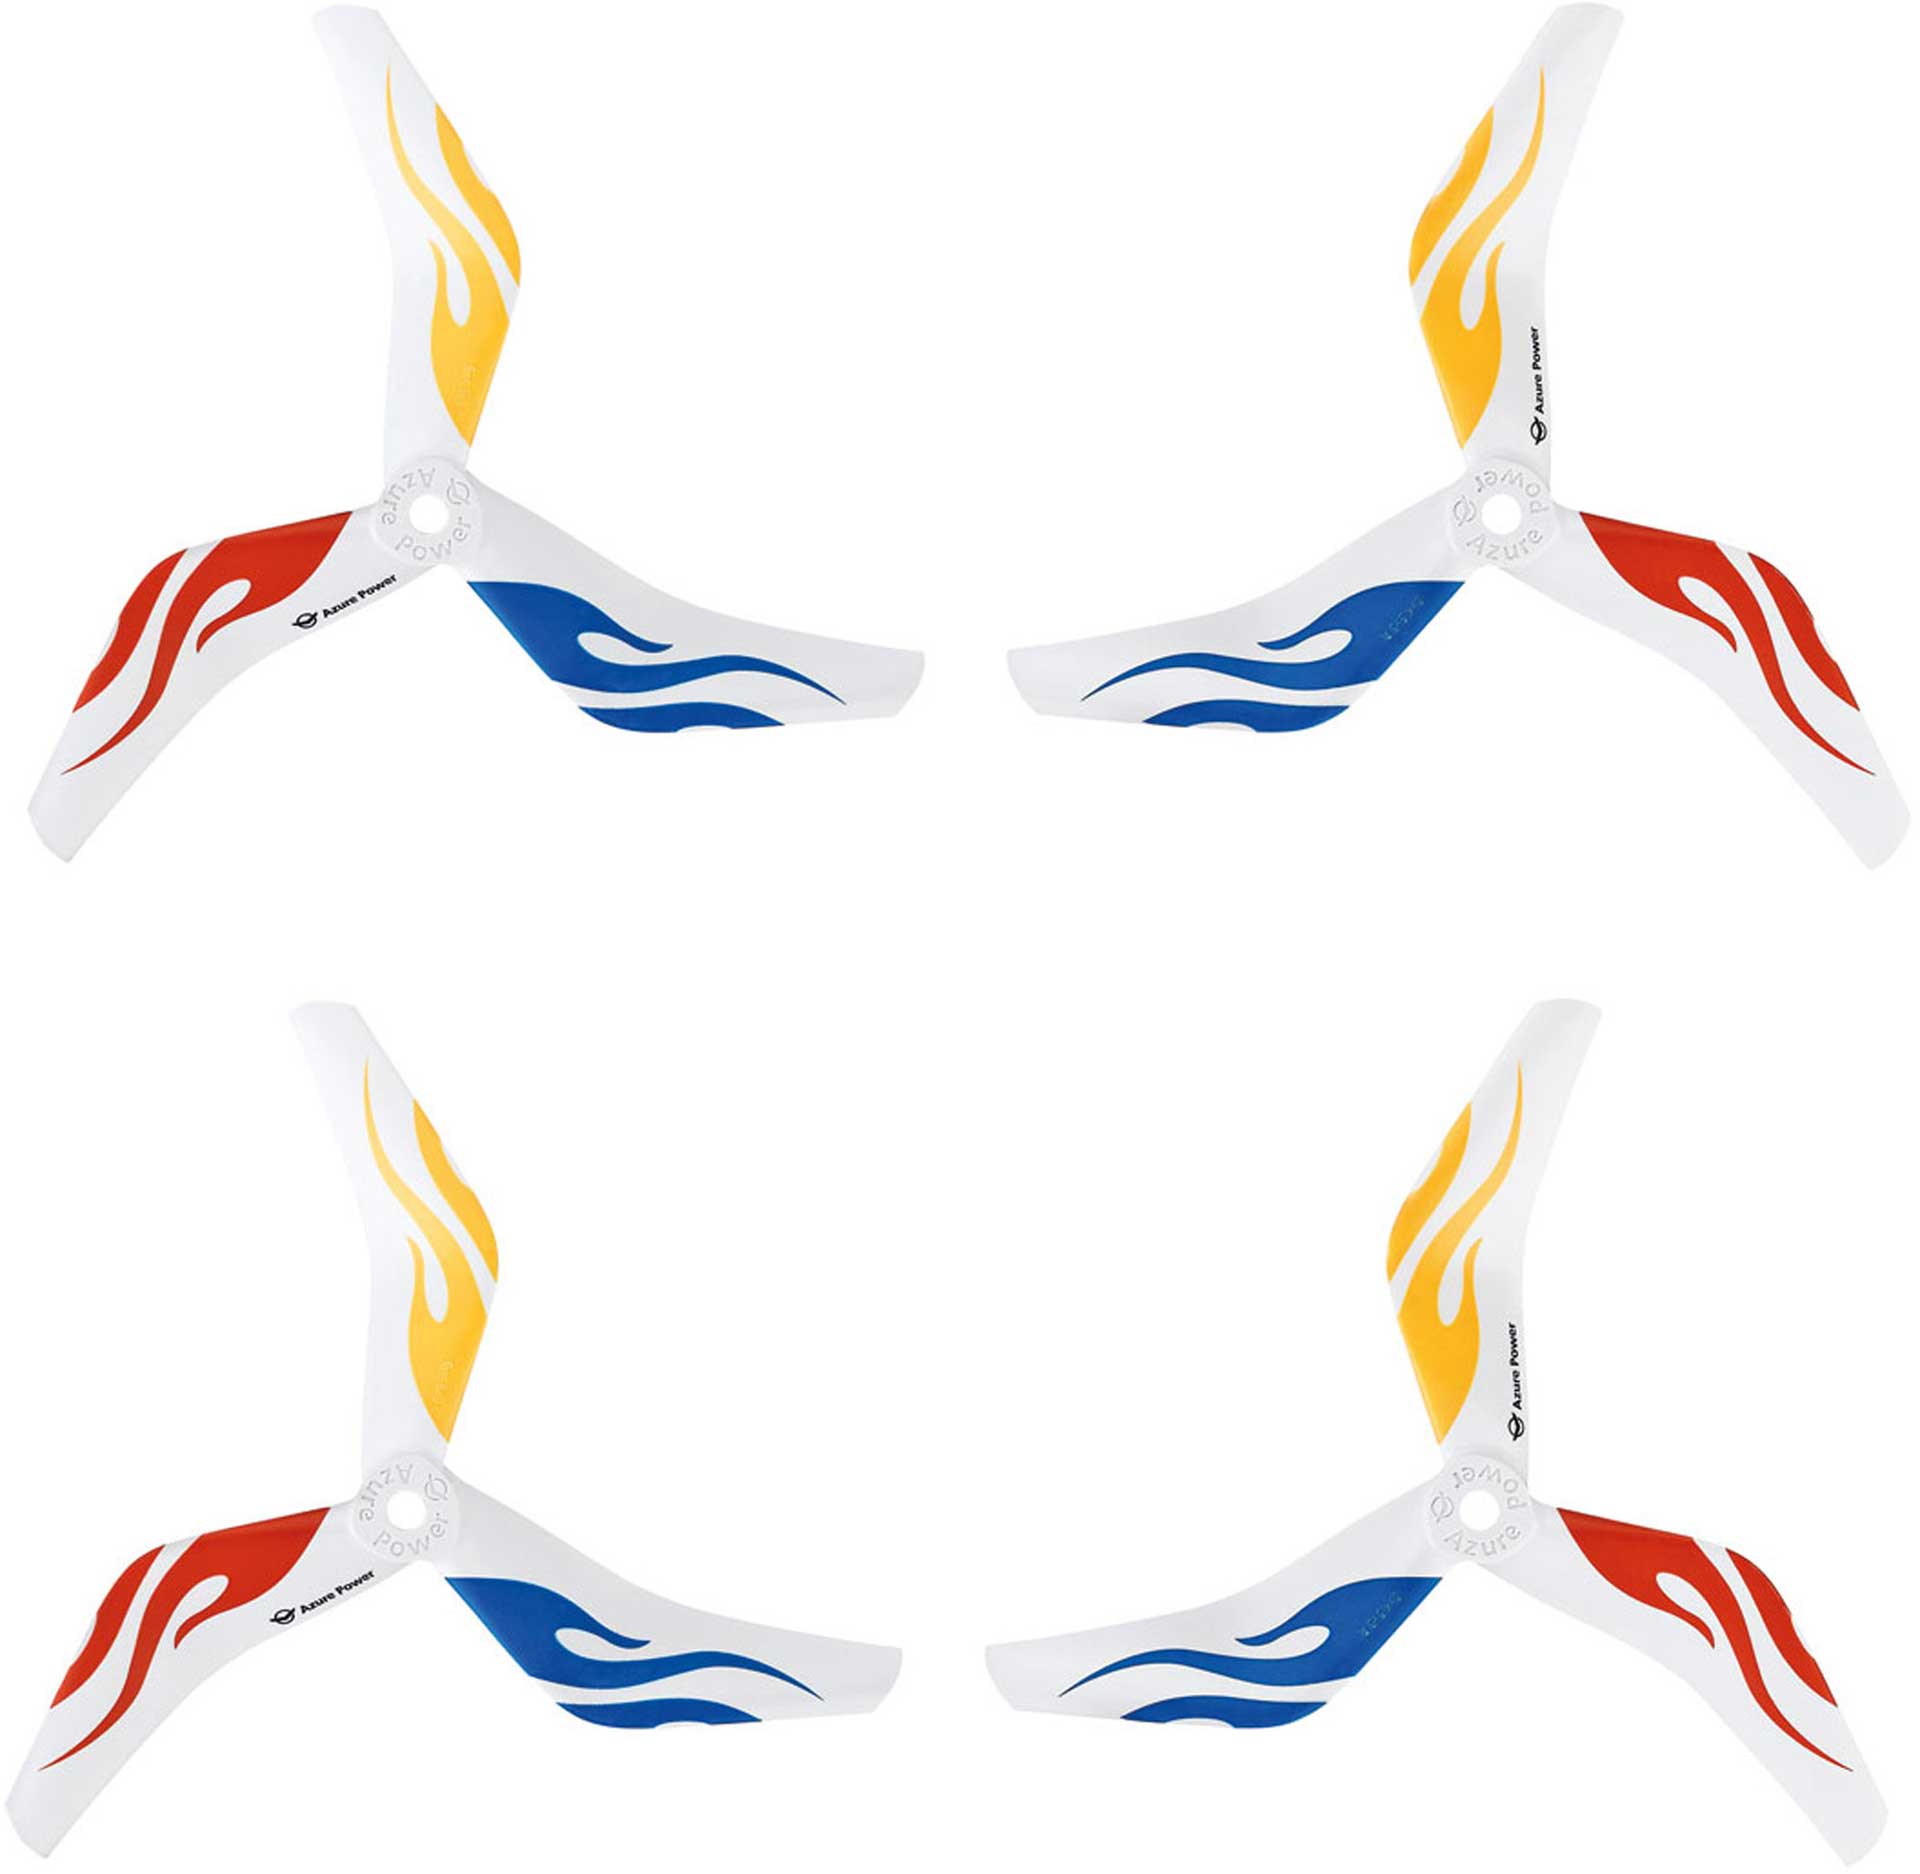 AZURE POWER RACE & FREESTYLE 3-BLADES 5045 PROPELLER (PC), WHITE, 10X RIGHT + 10X LEFT